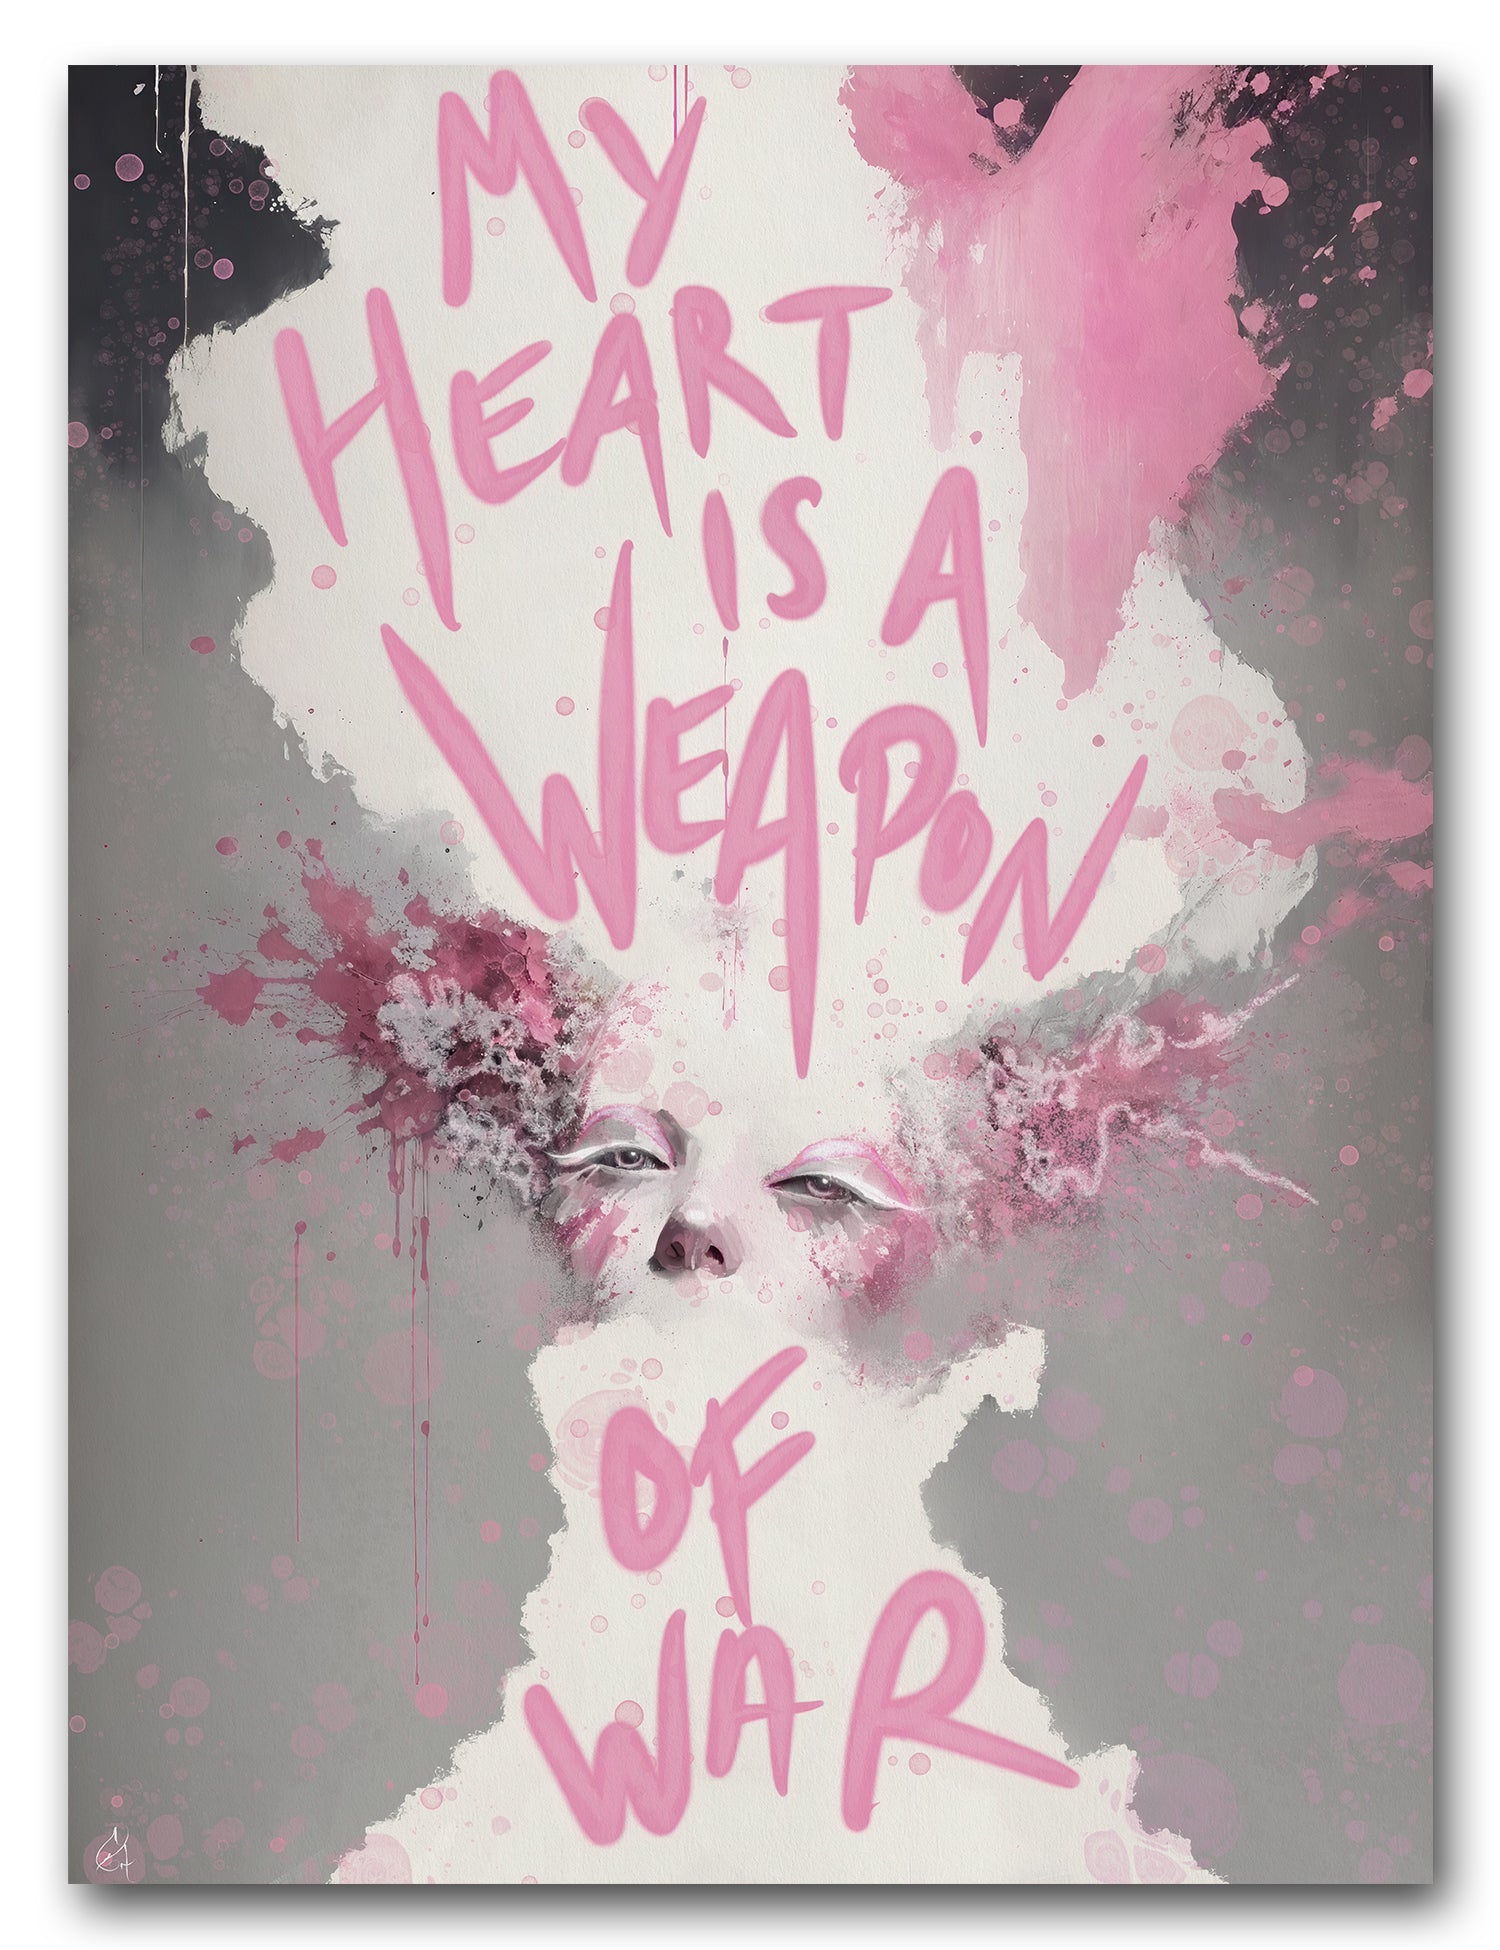 Weapon of War - Limited Edition of 100 Fine Art Giclee Prints